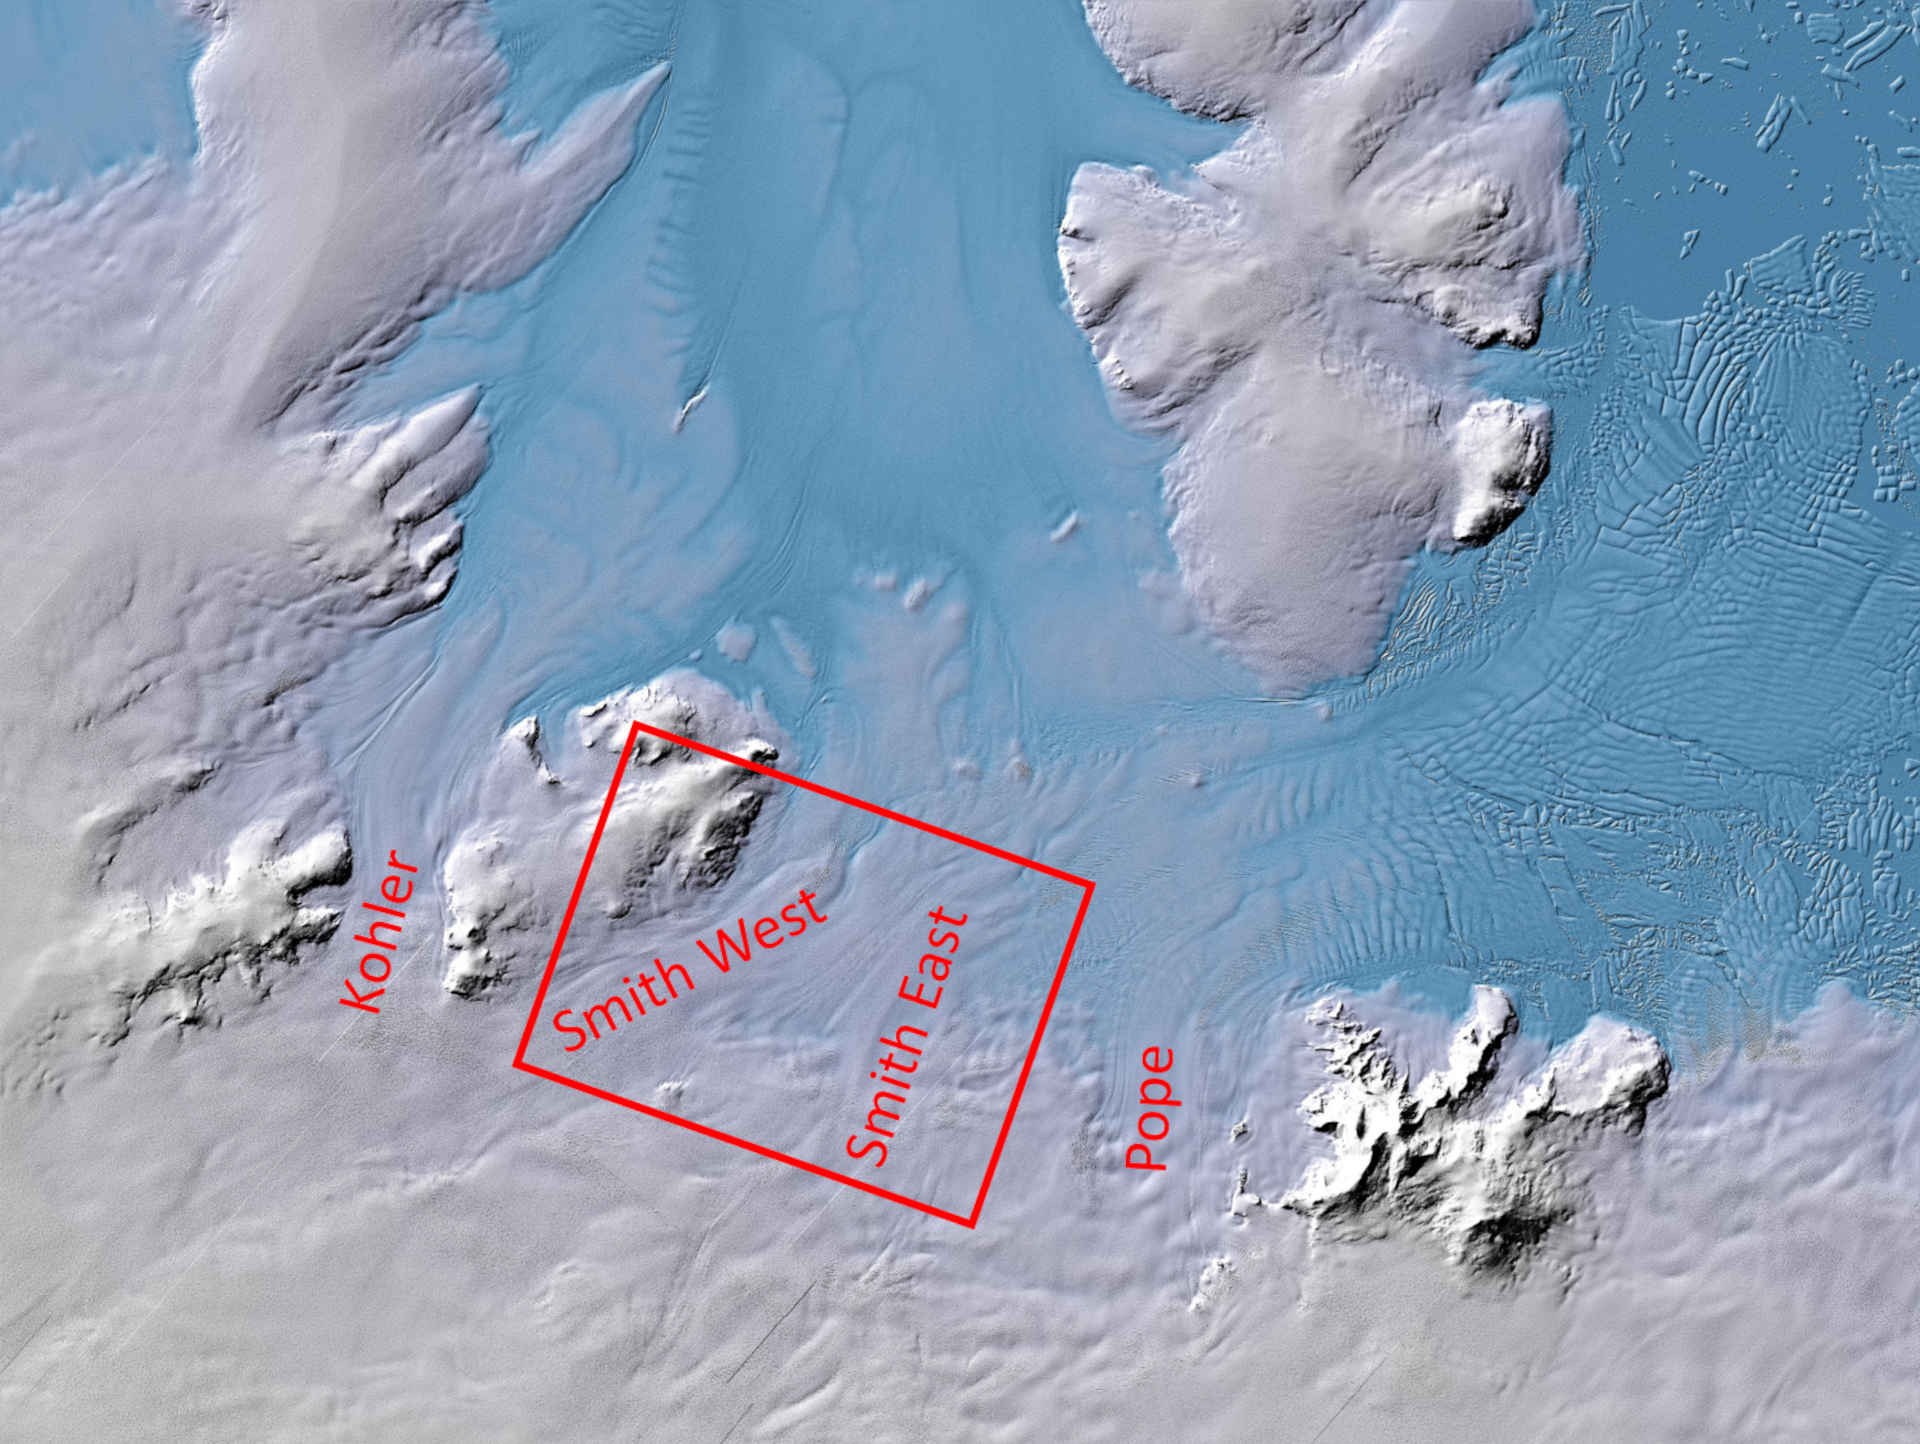 West Antarctica – TanDEM-X terrain image showing the Kohler, Smith and Pope glaciers